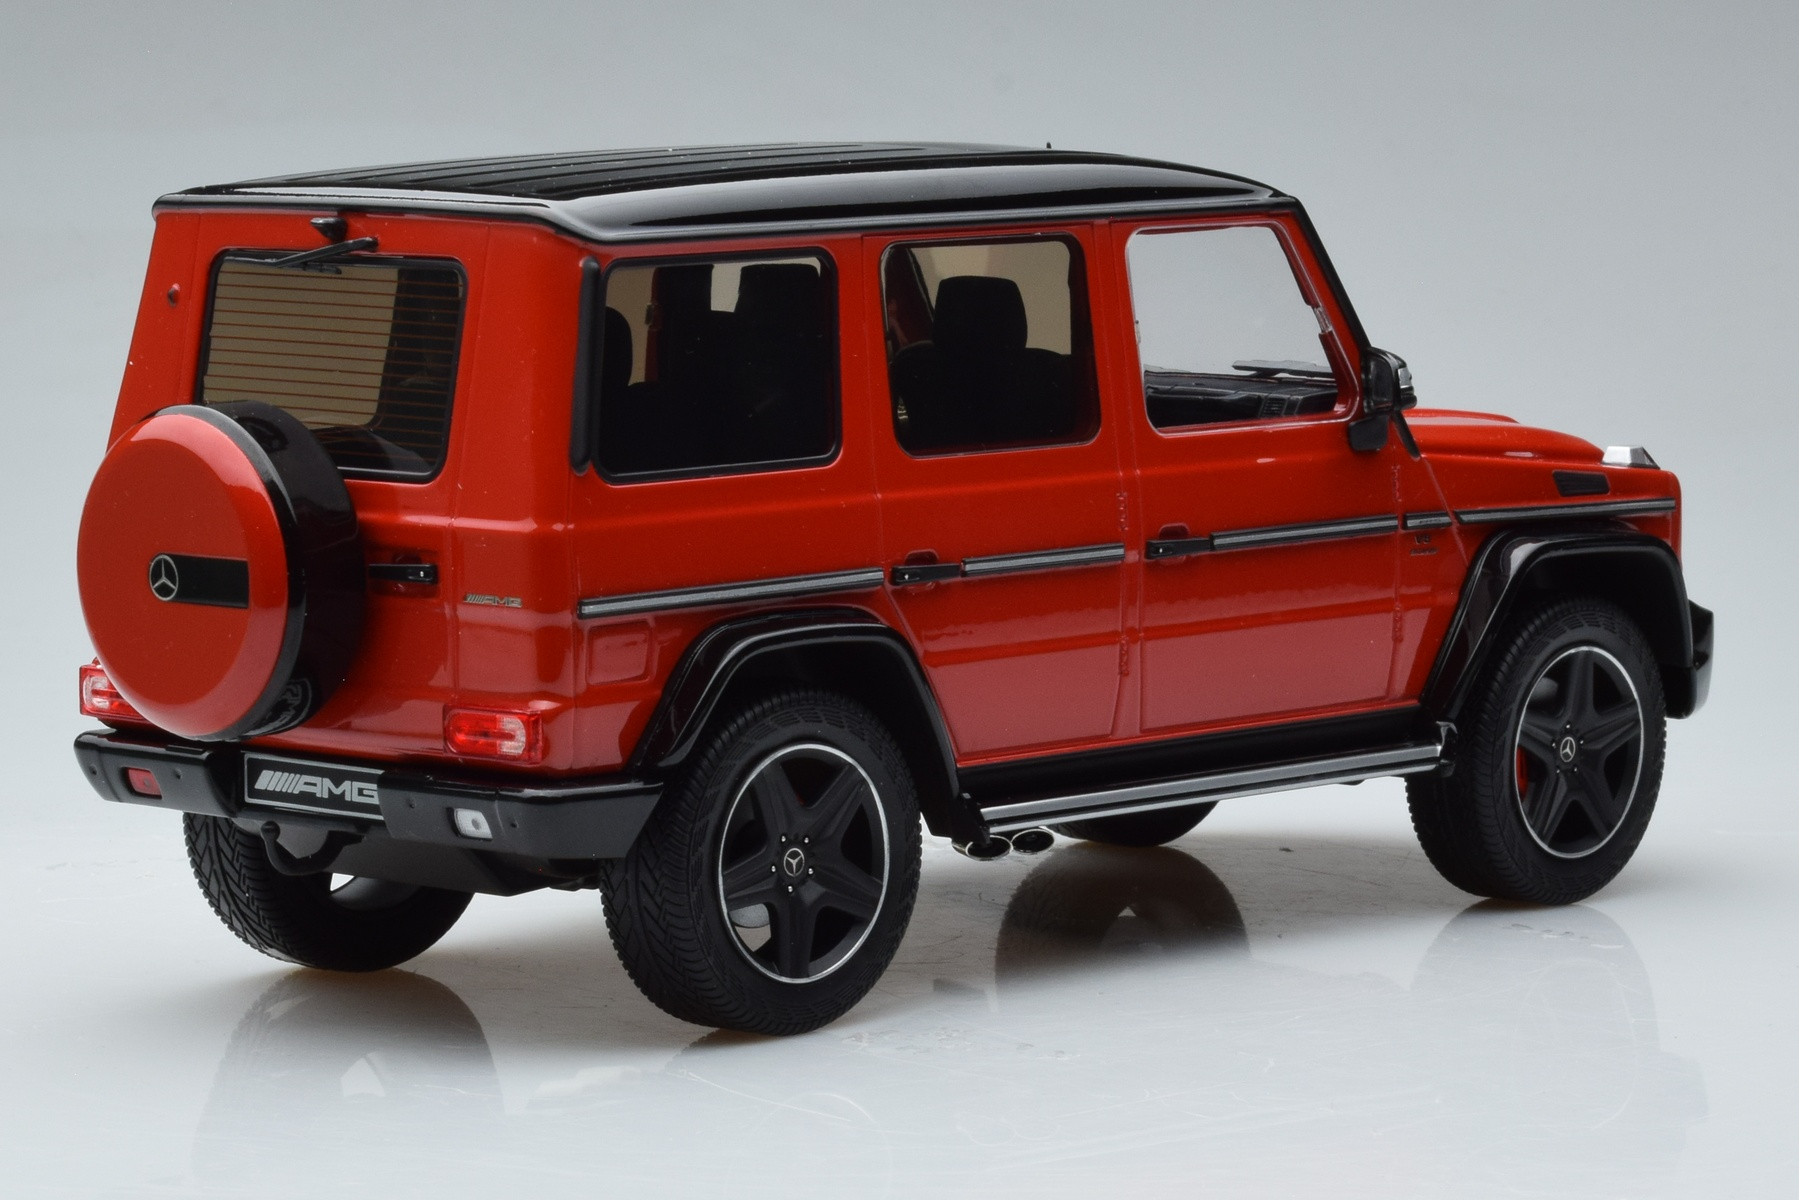 Mercedes G Class W463 G63 AMG Red iScale 1/18